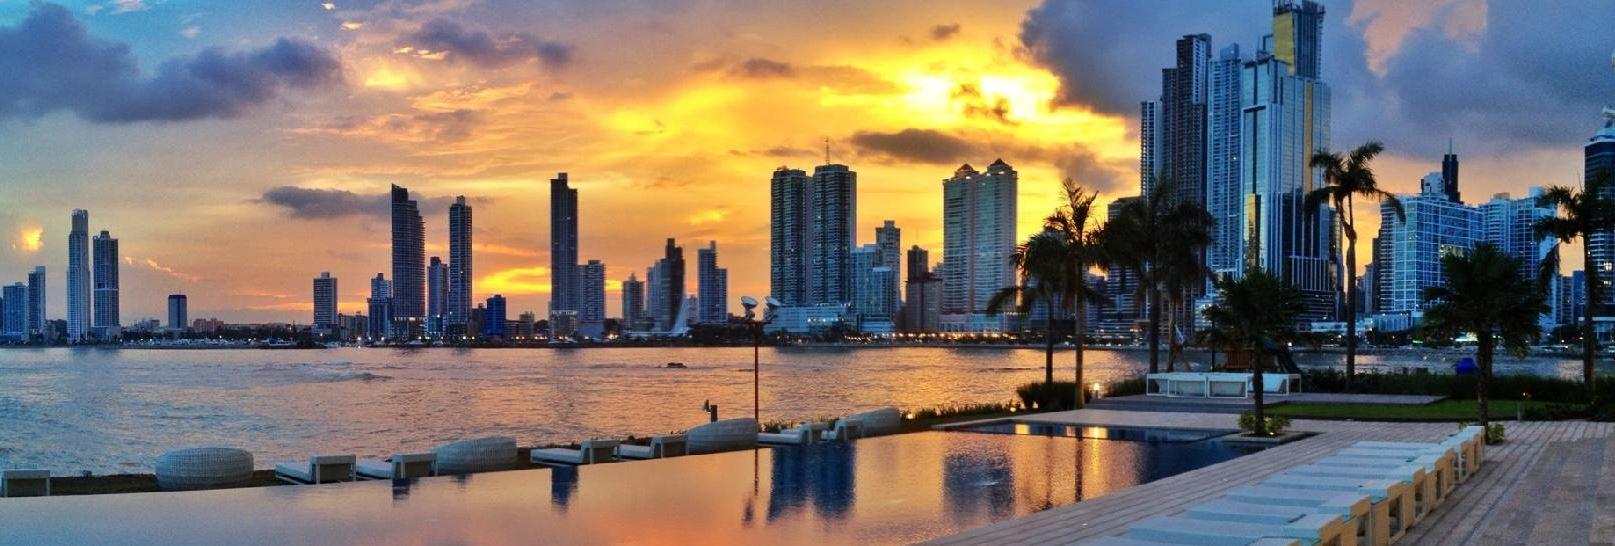 How To Finance Real Estate In Panama